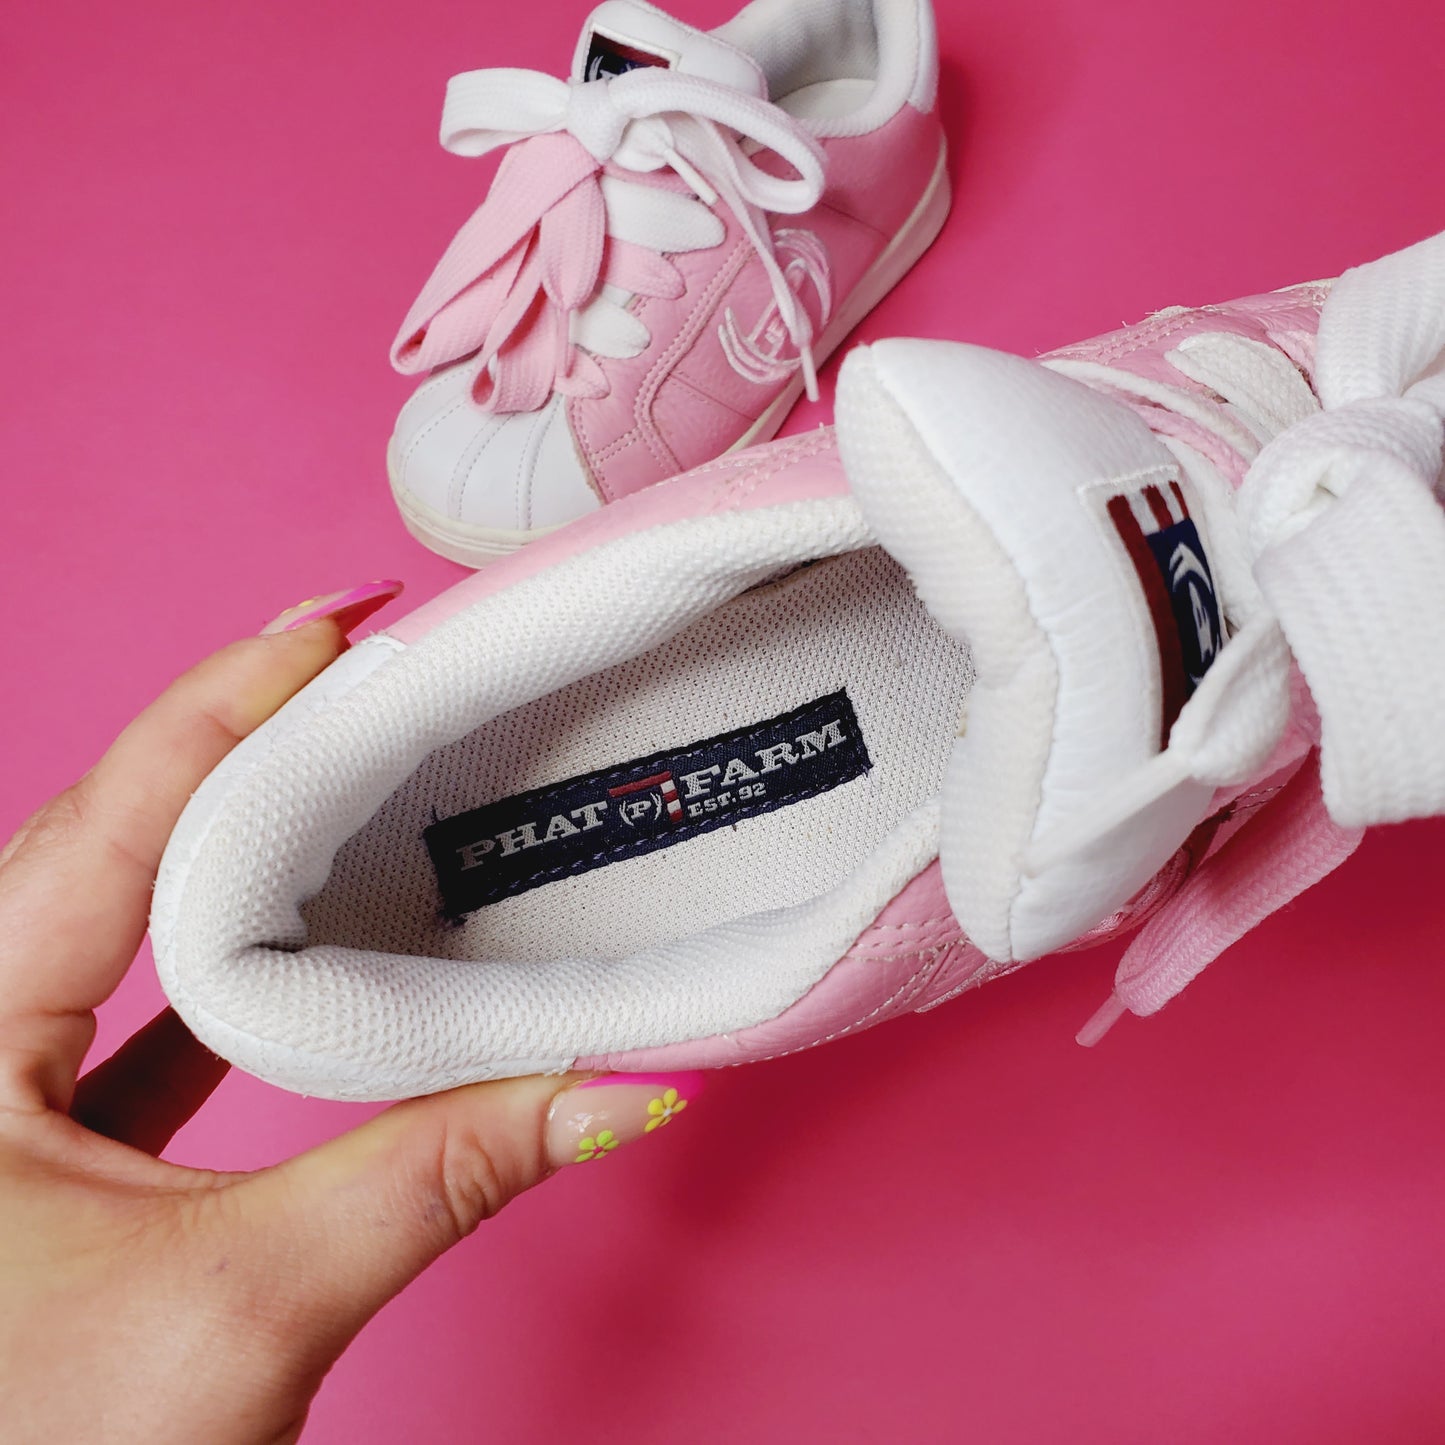 Baby pink & white phat farm lowtop sneakers